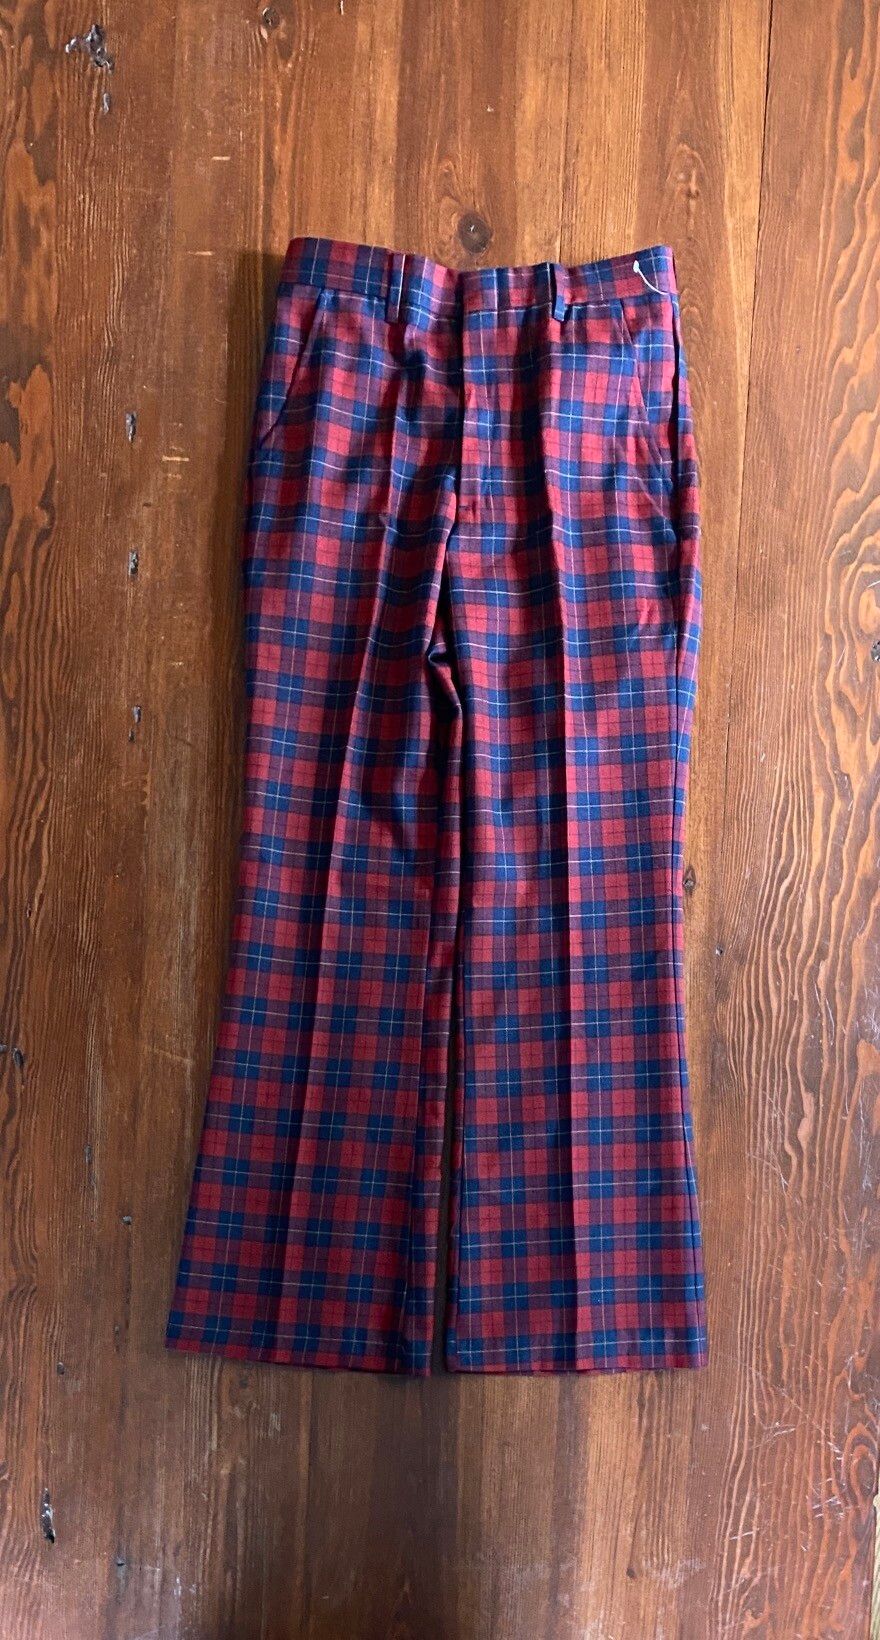 Pre-owned Vintage Nwt 60's Plaid Flared Slacks 29x30 Pants In Multicolor